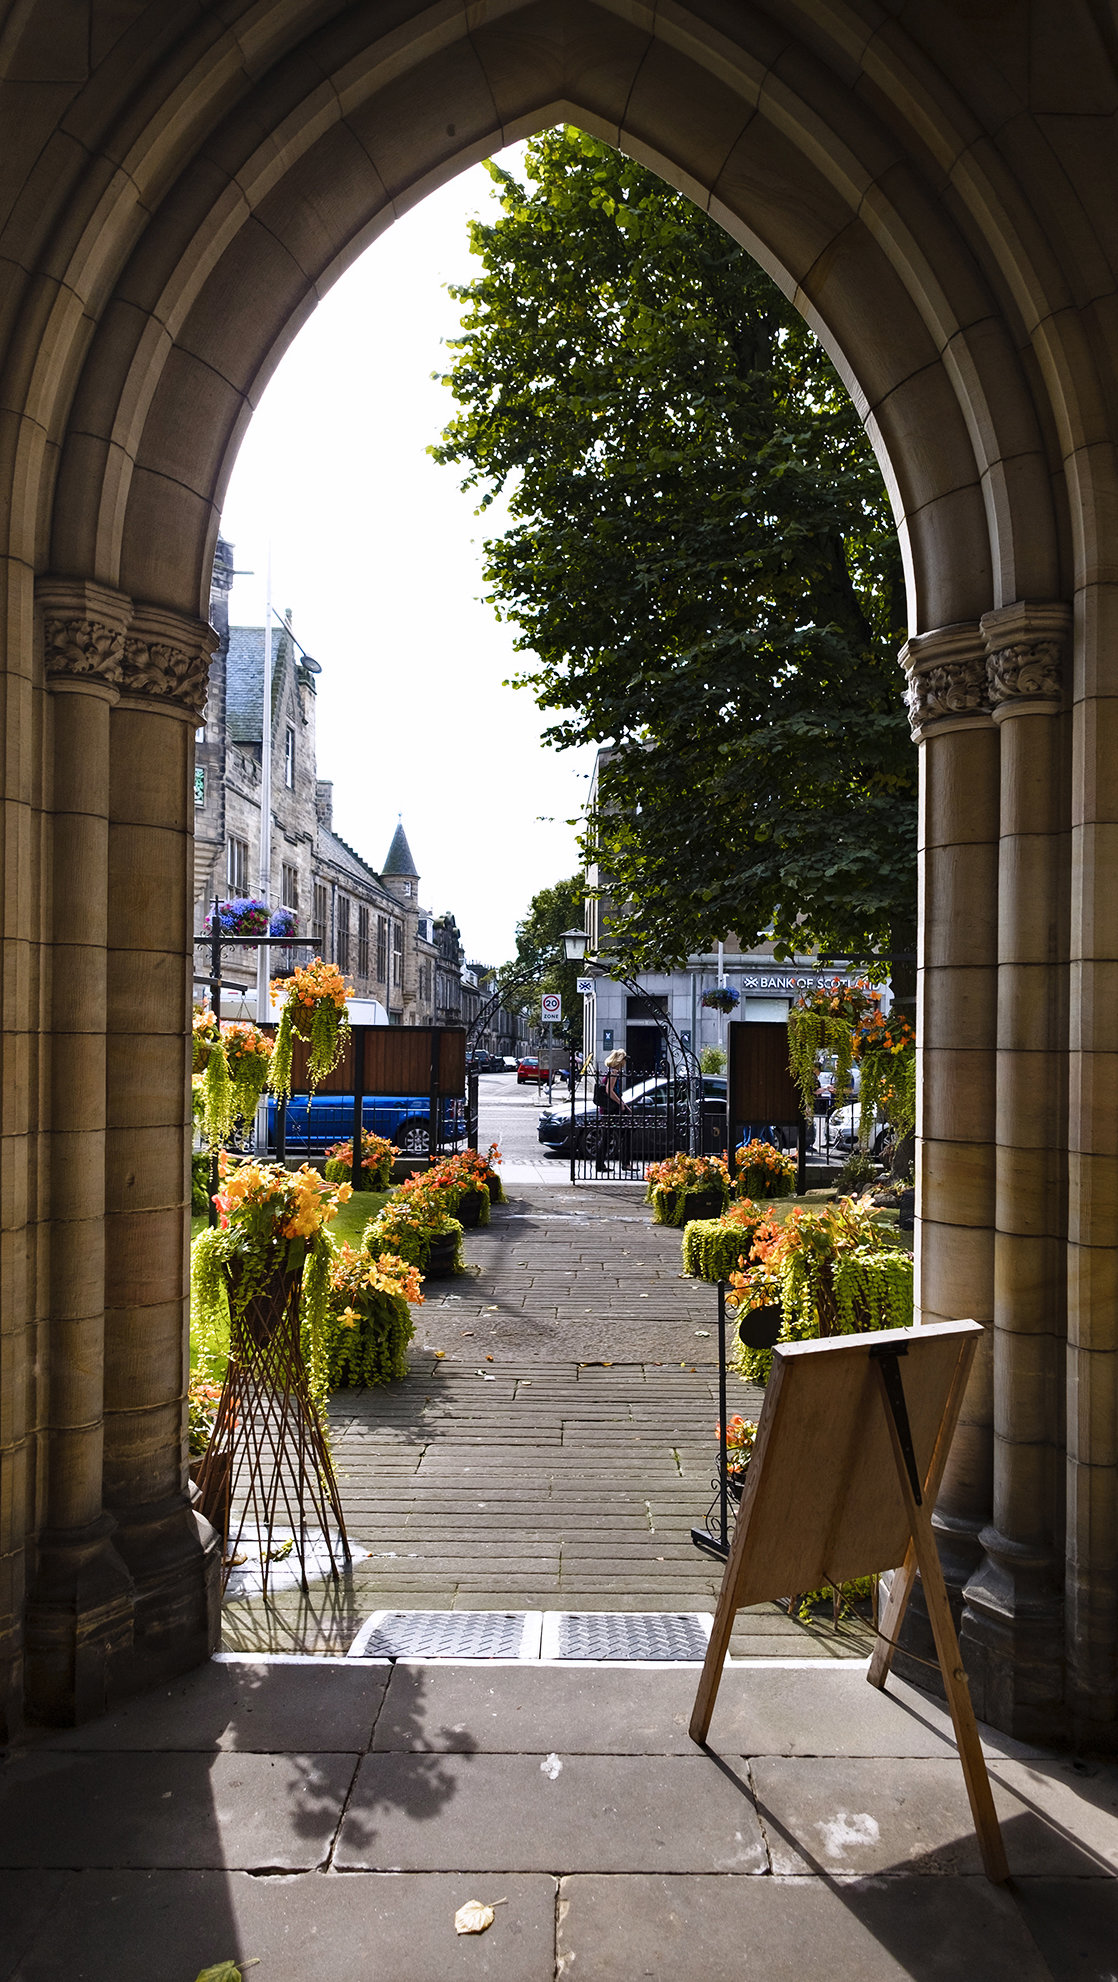 St Andrews, Looking out the Door of Holy Trinity Church